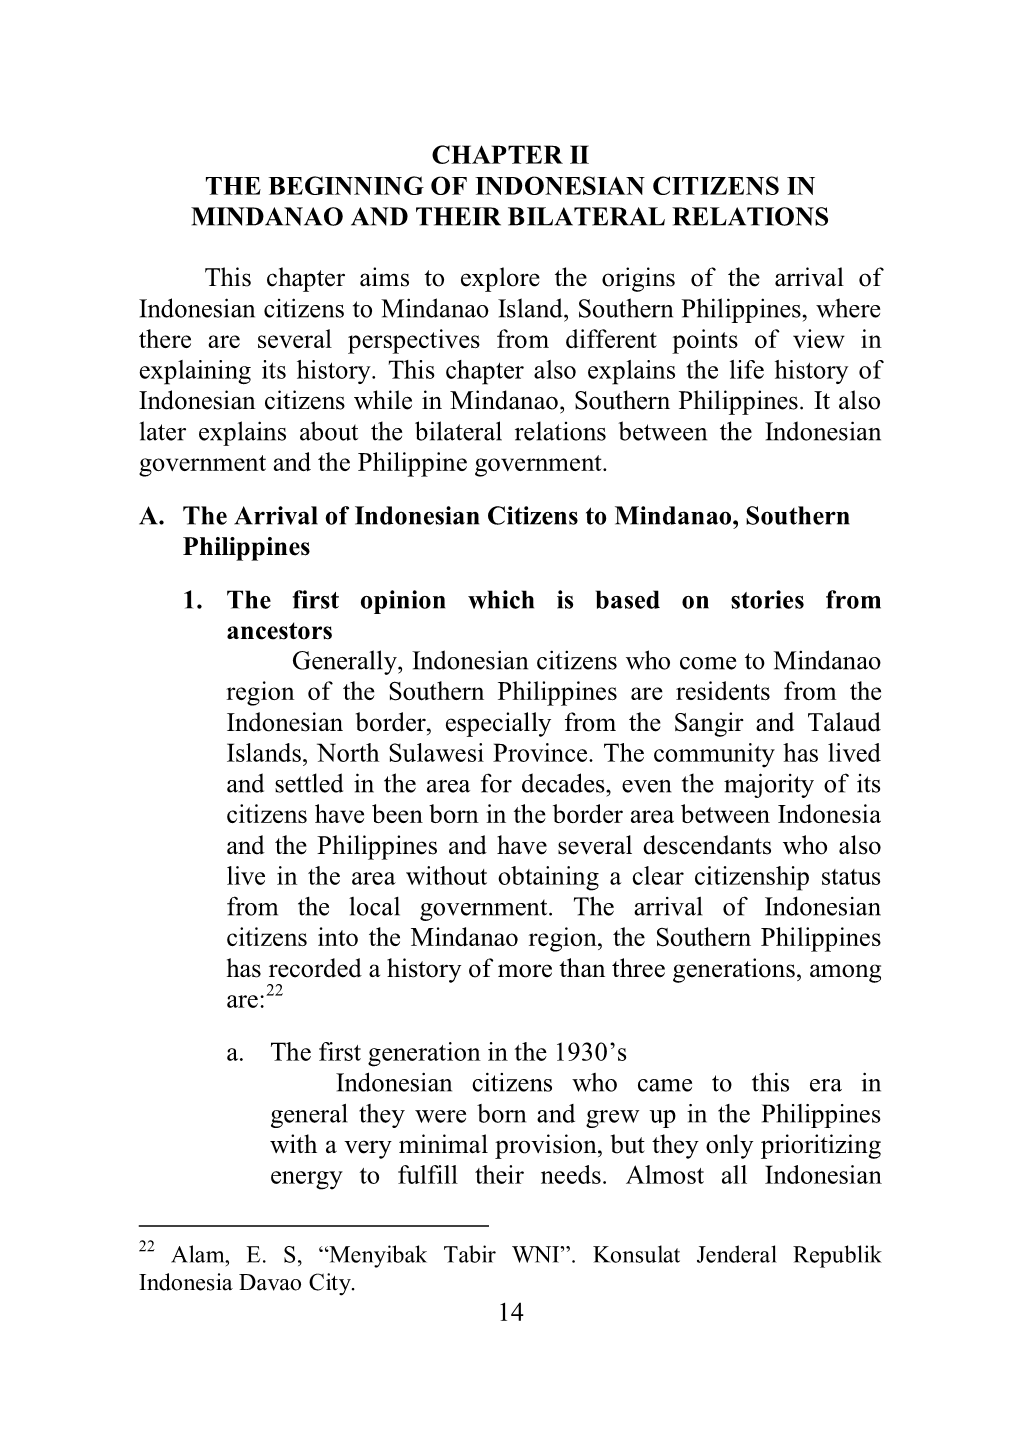 14 CHAPTER II the BEGINNING of INDONESIAN CITIZENS in MINDANAO and THEIR BILATERAL RELATIONS This Chapter Aims to Explore the Or